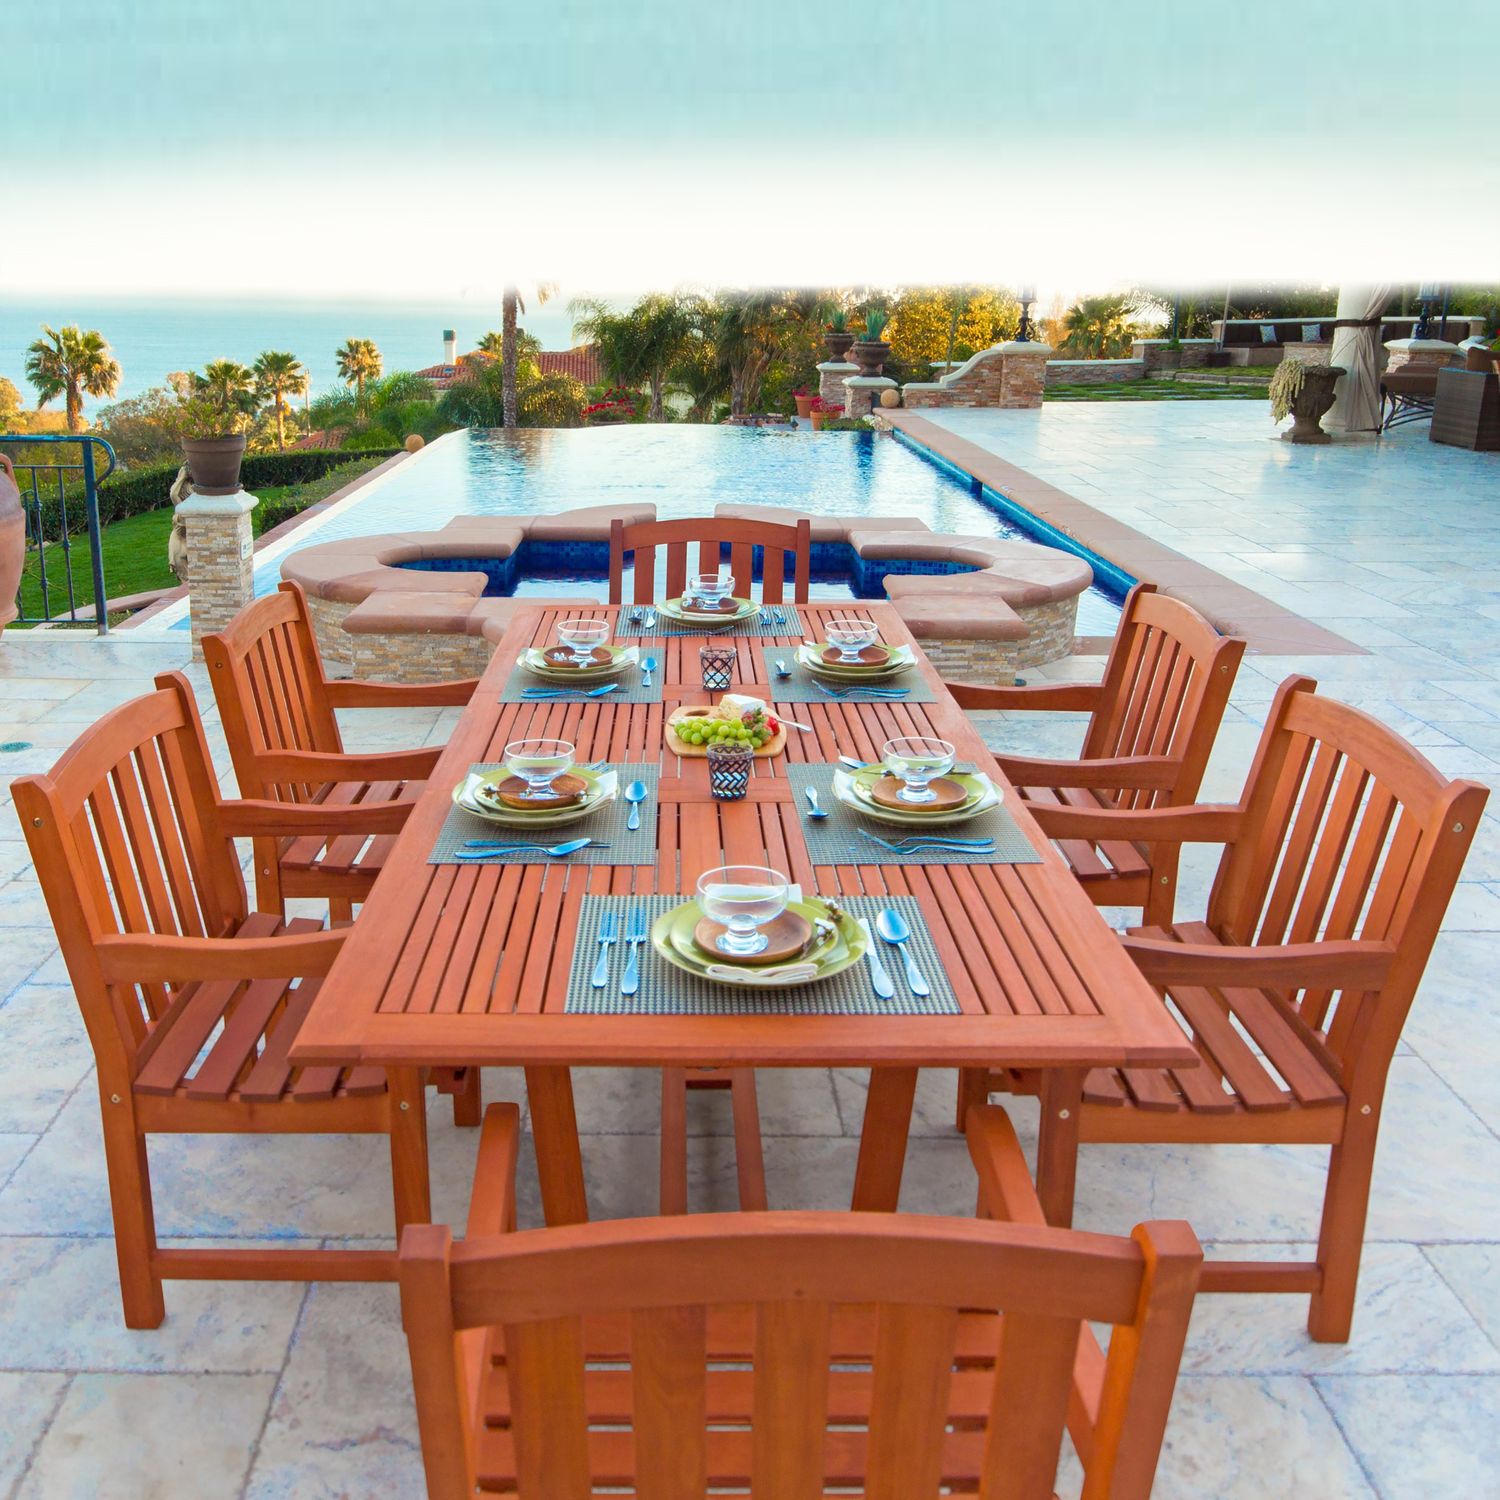 Malibu Outdoor 7-piece Wood Patio Dining Set with Extension Table